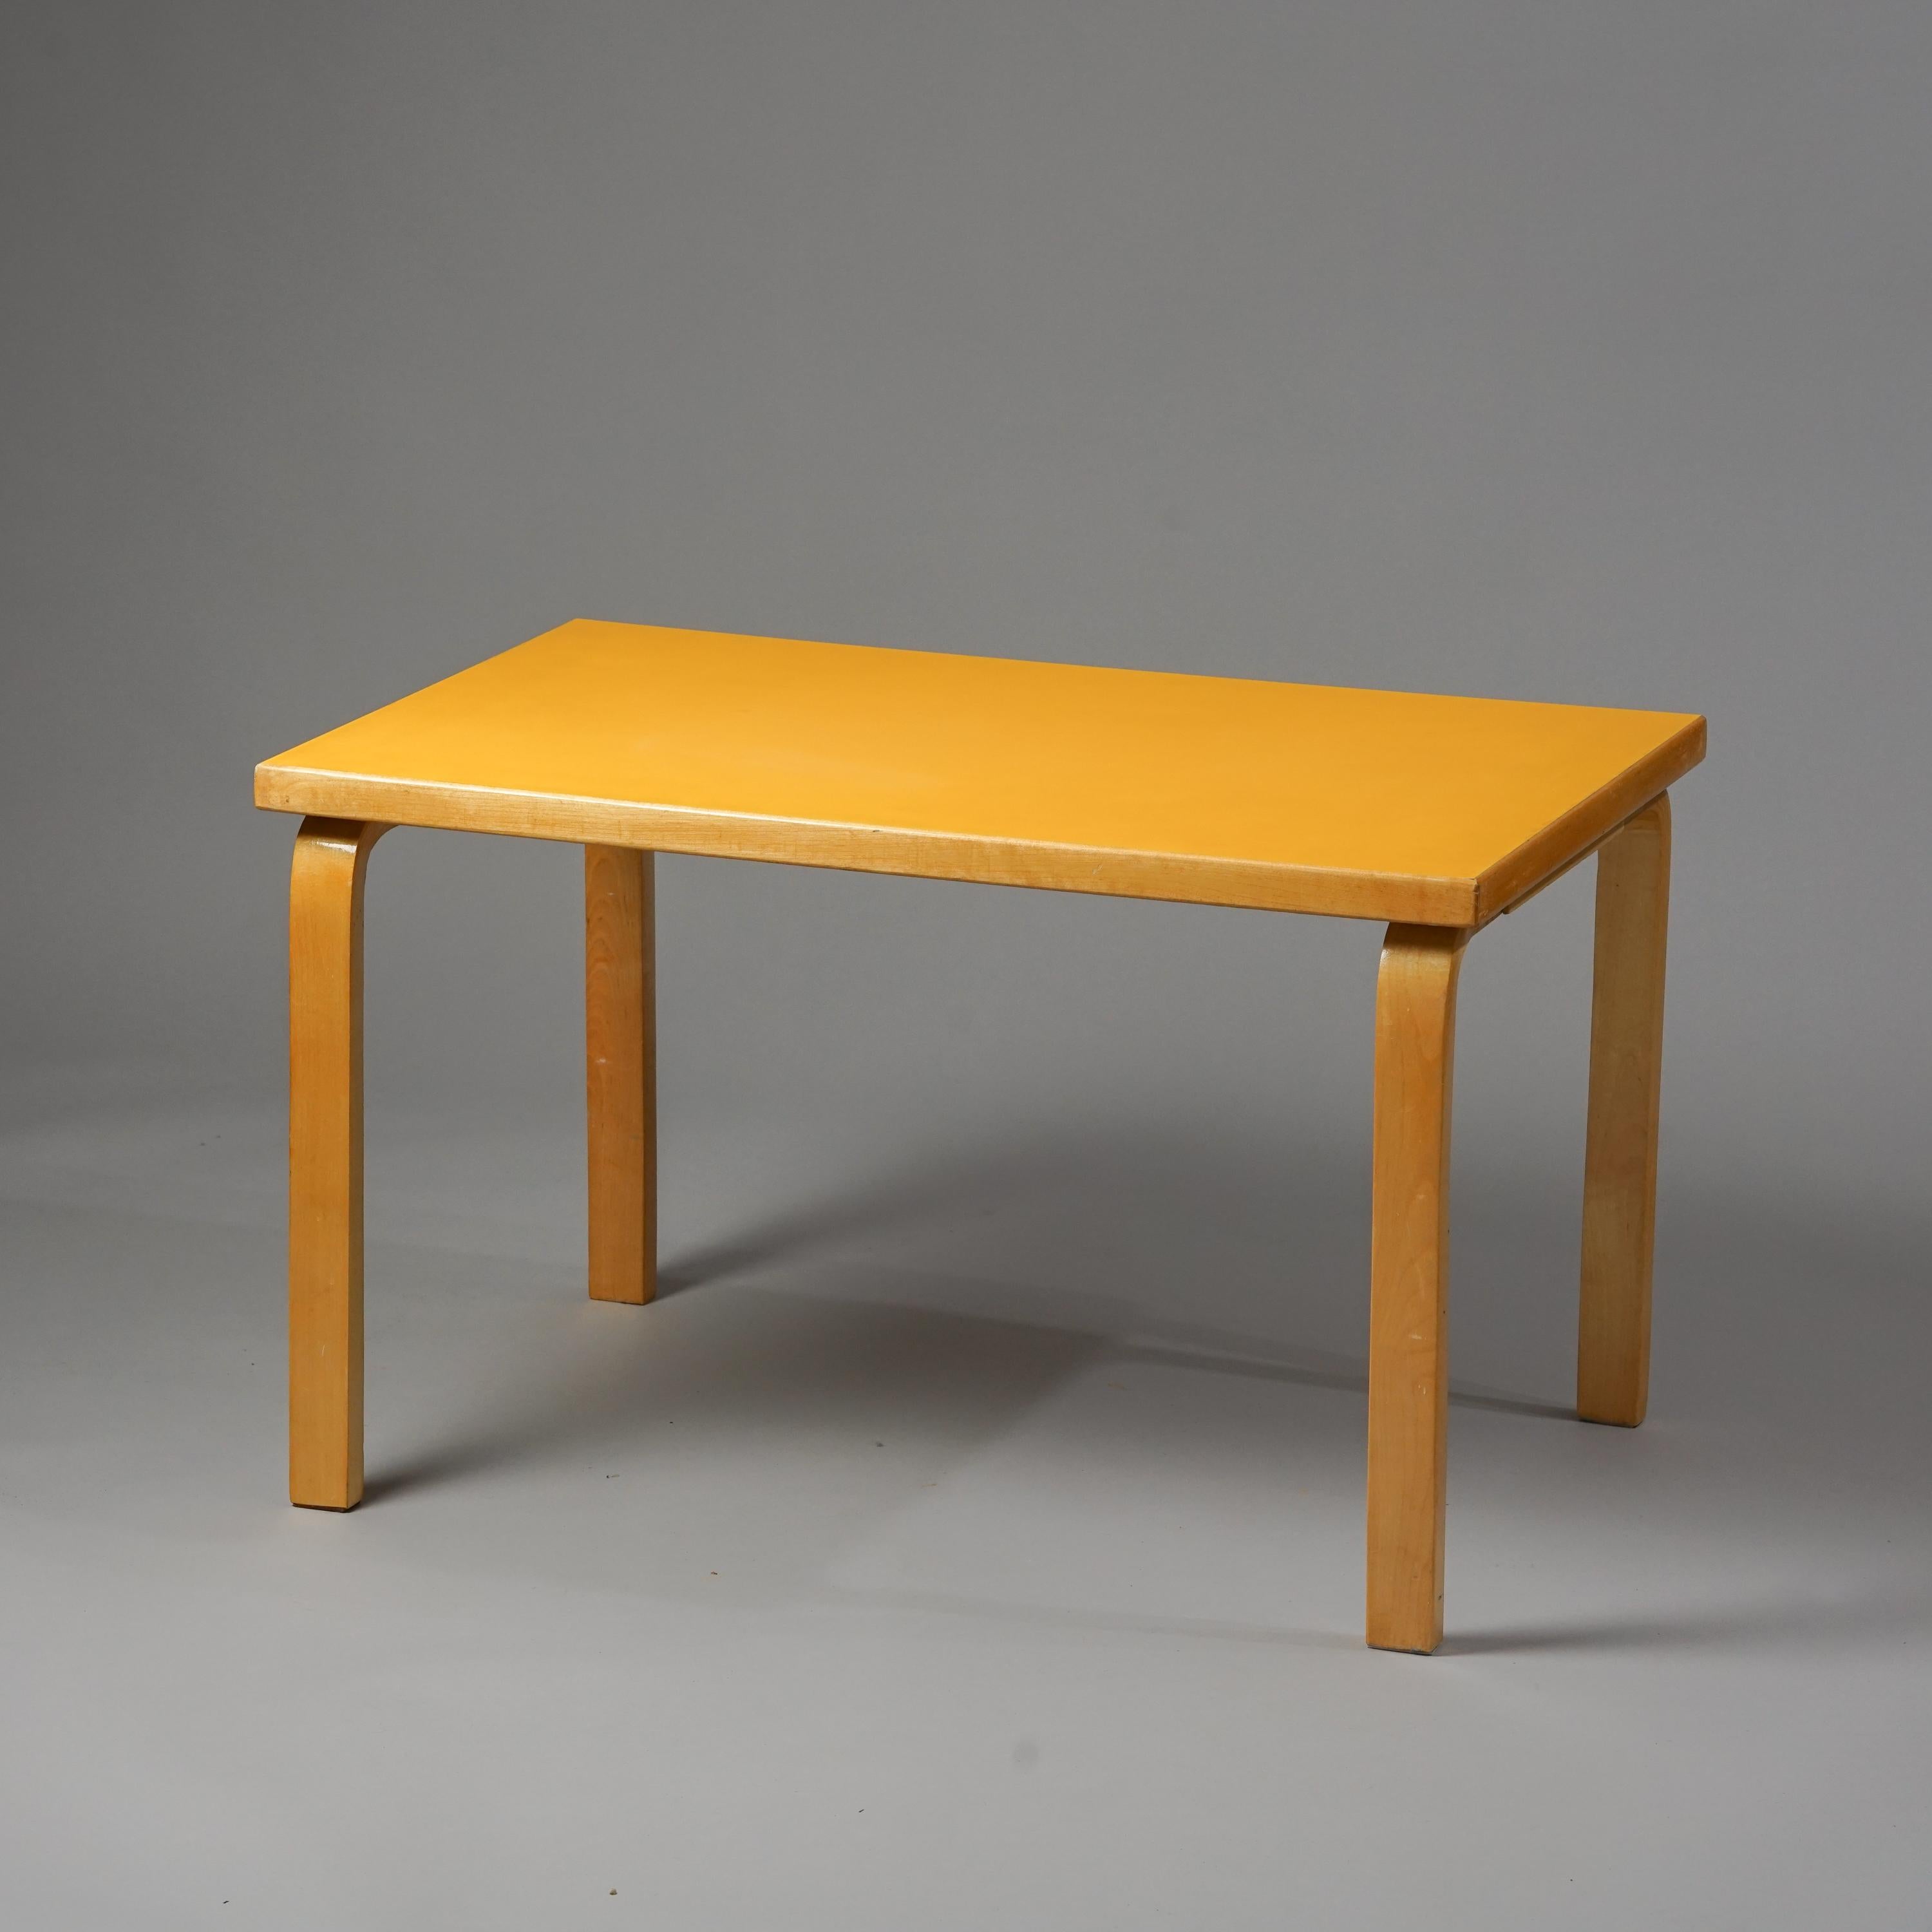 Alvar Aalto children's table for Artek from the 1960s. Lacquered birch and linoleum surface. Rare yellow colour. Good vintage condition, minor wear consistent with age and use. Classic L-legs. 

